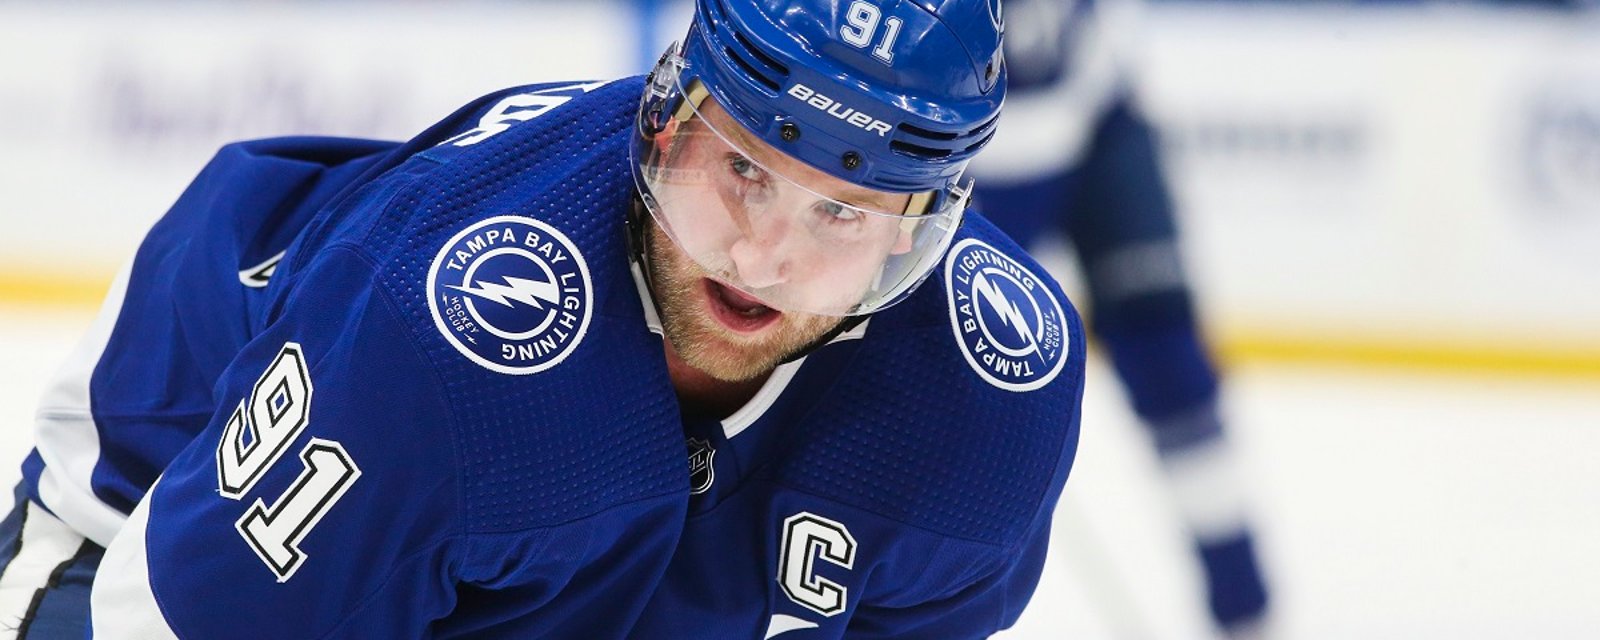 Steven Stamkos publicly questions the NHL's recent decisions.